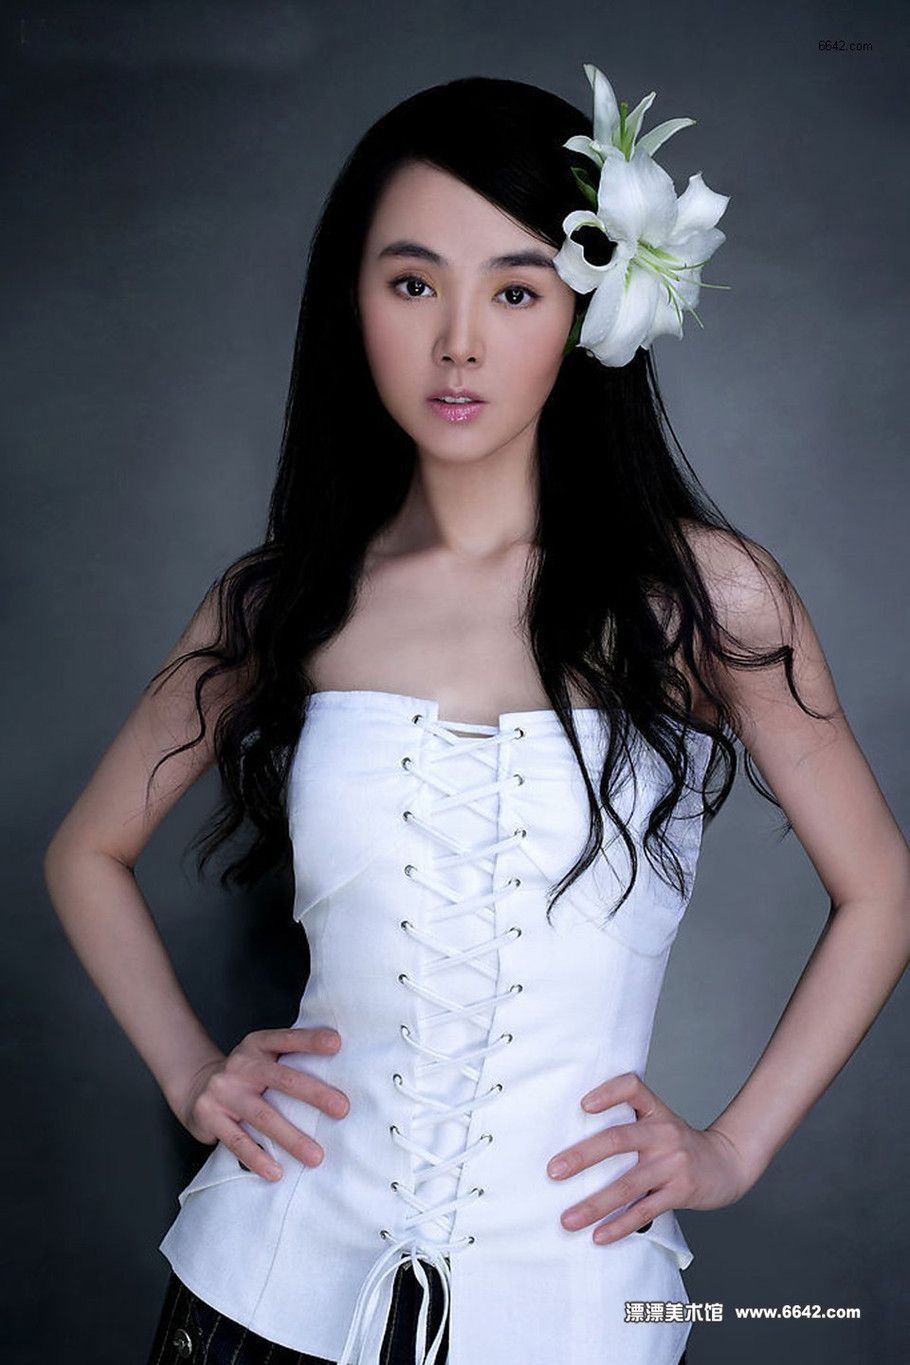 Hongbo Jiang Sexy and Hottest Photos , Latest Pics